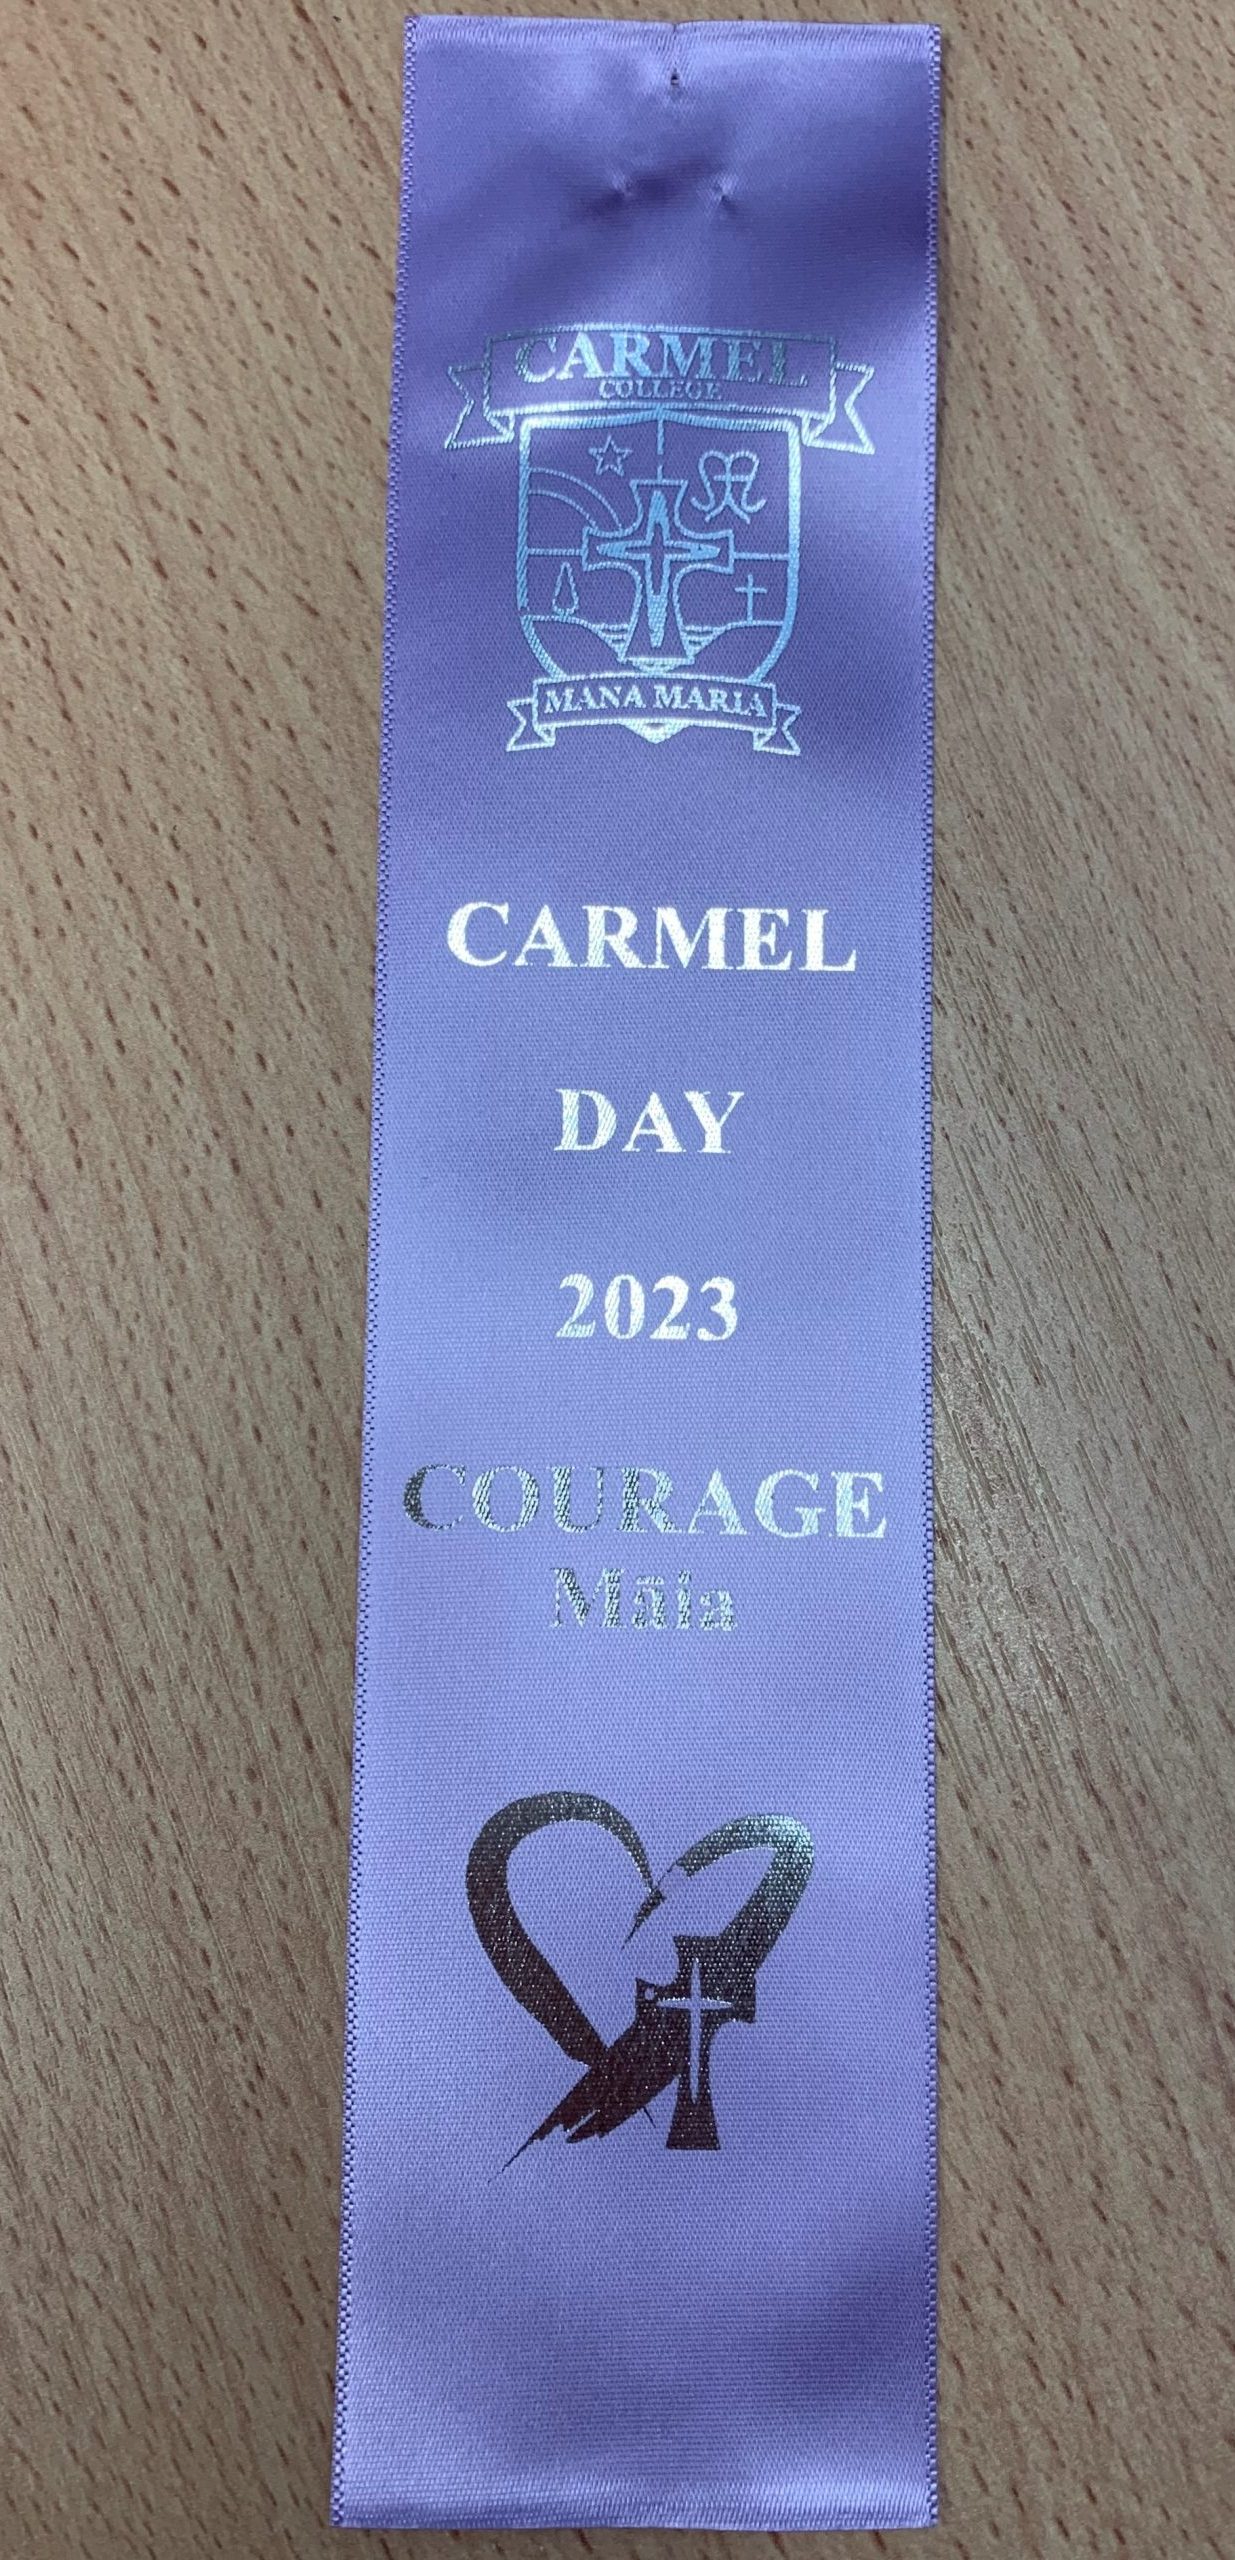 Read more about the article Carmel Day Mercy Awards 2023